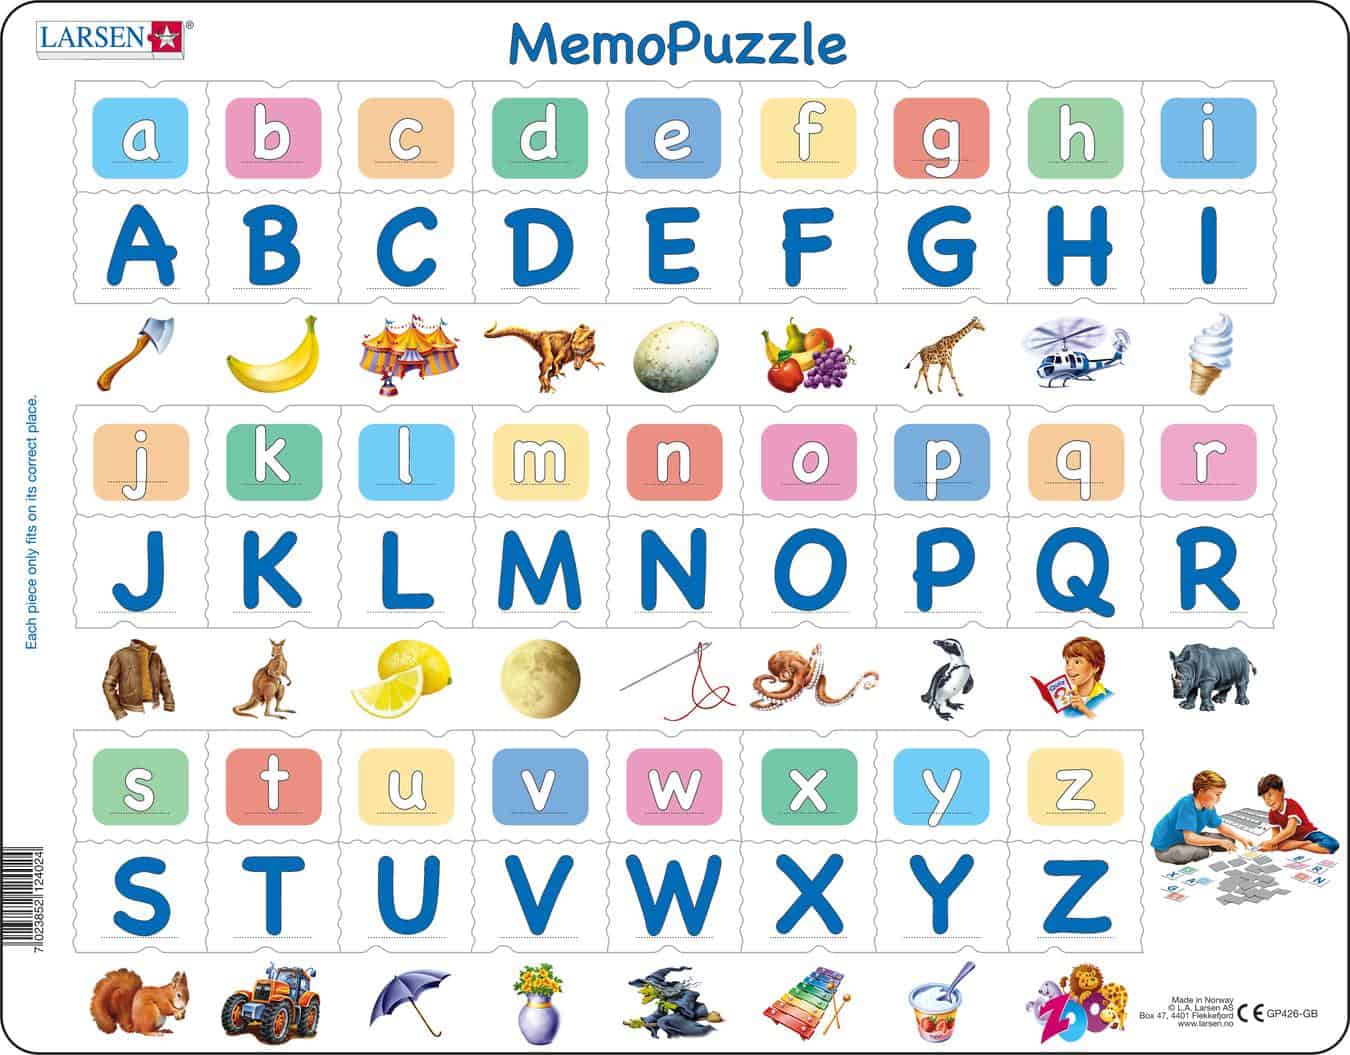 maxi-puzzle-alphabet-26-upper-and-lower-case-letters-english-larsen-teia-education-play